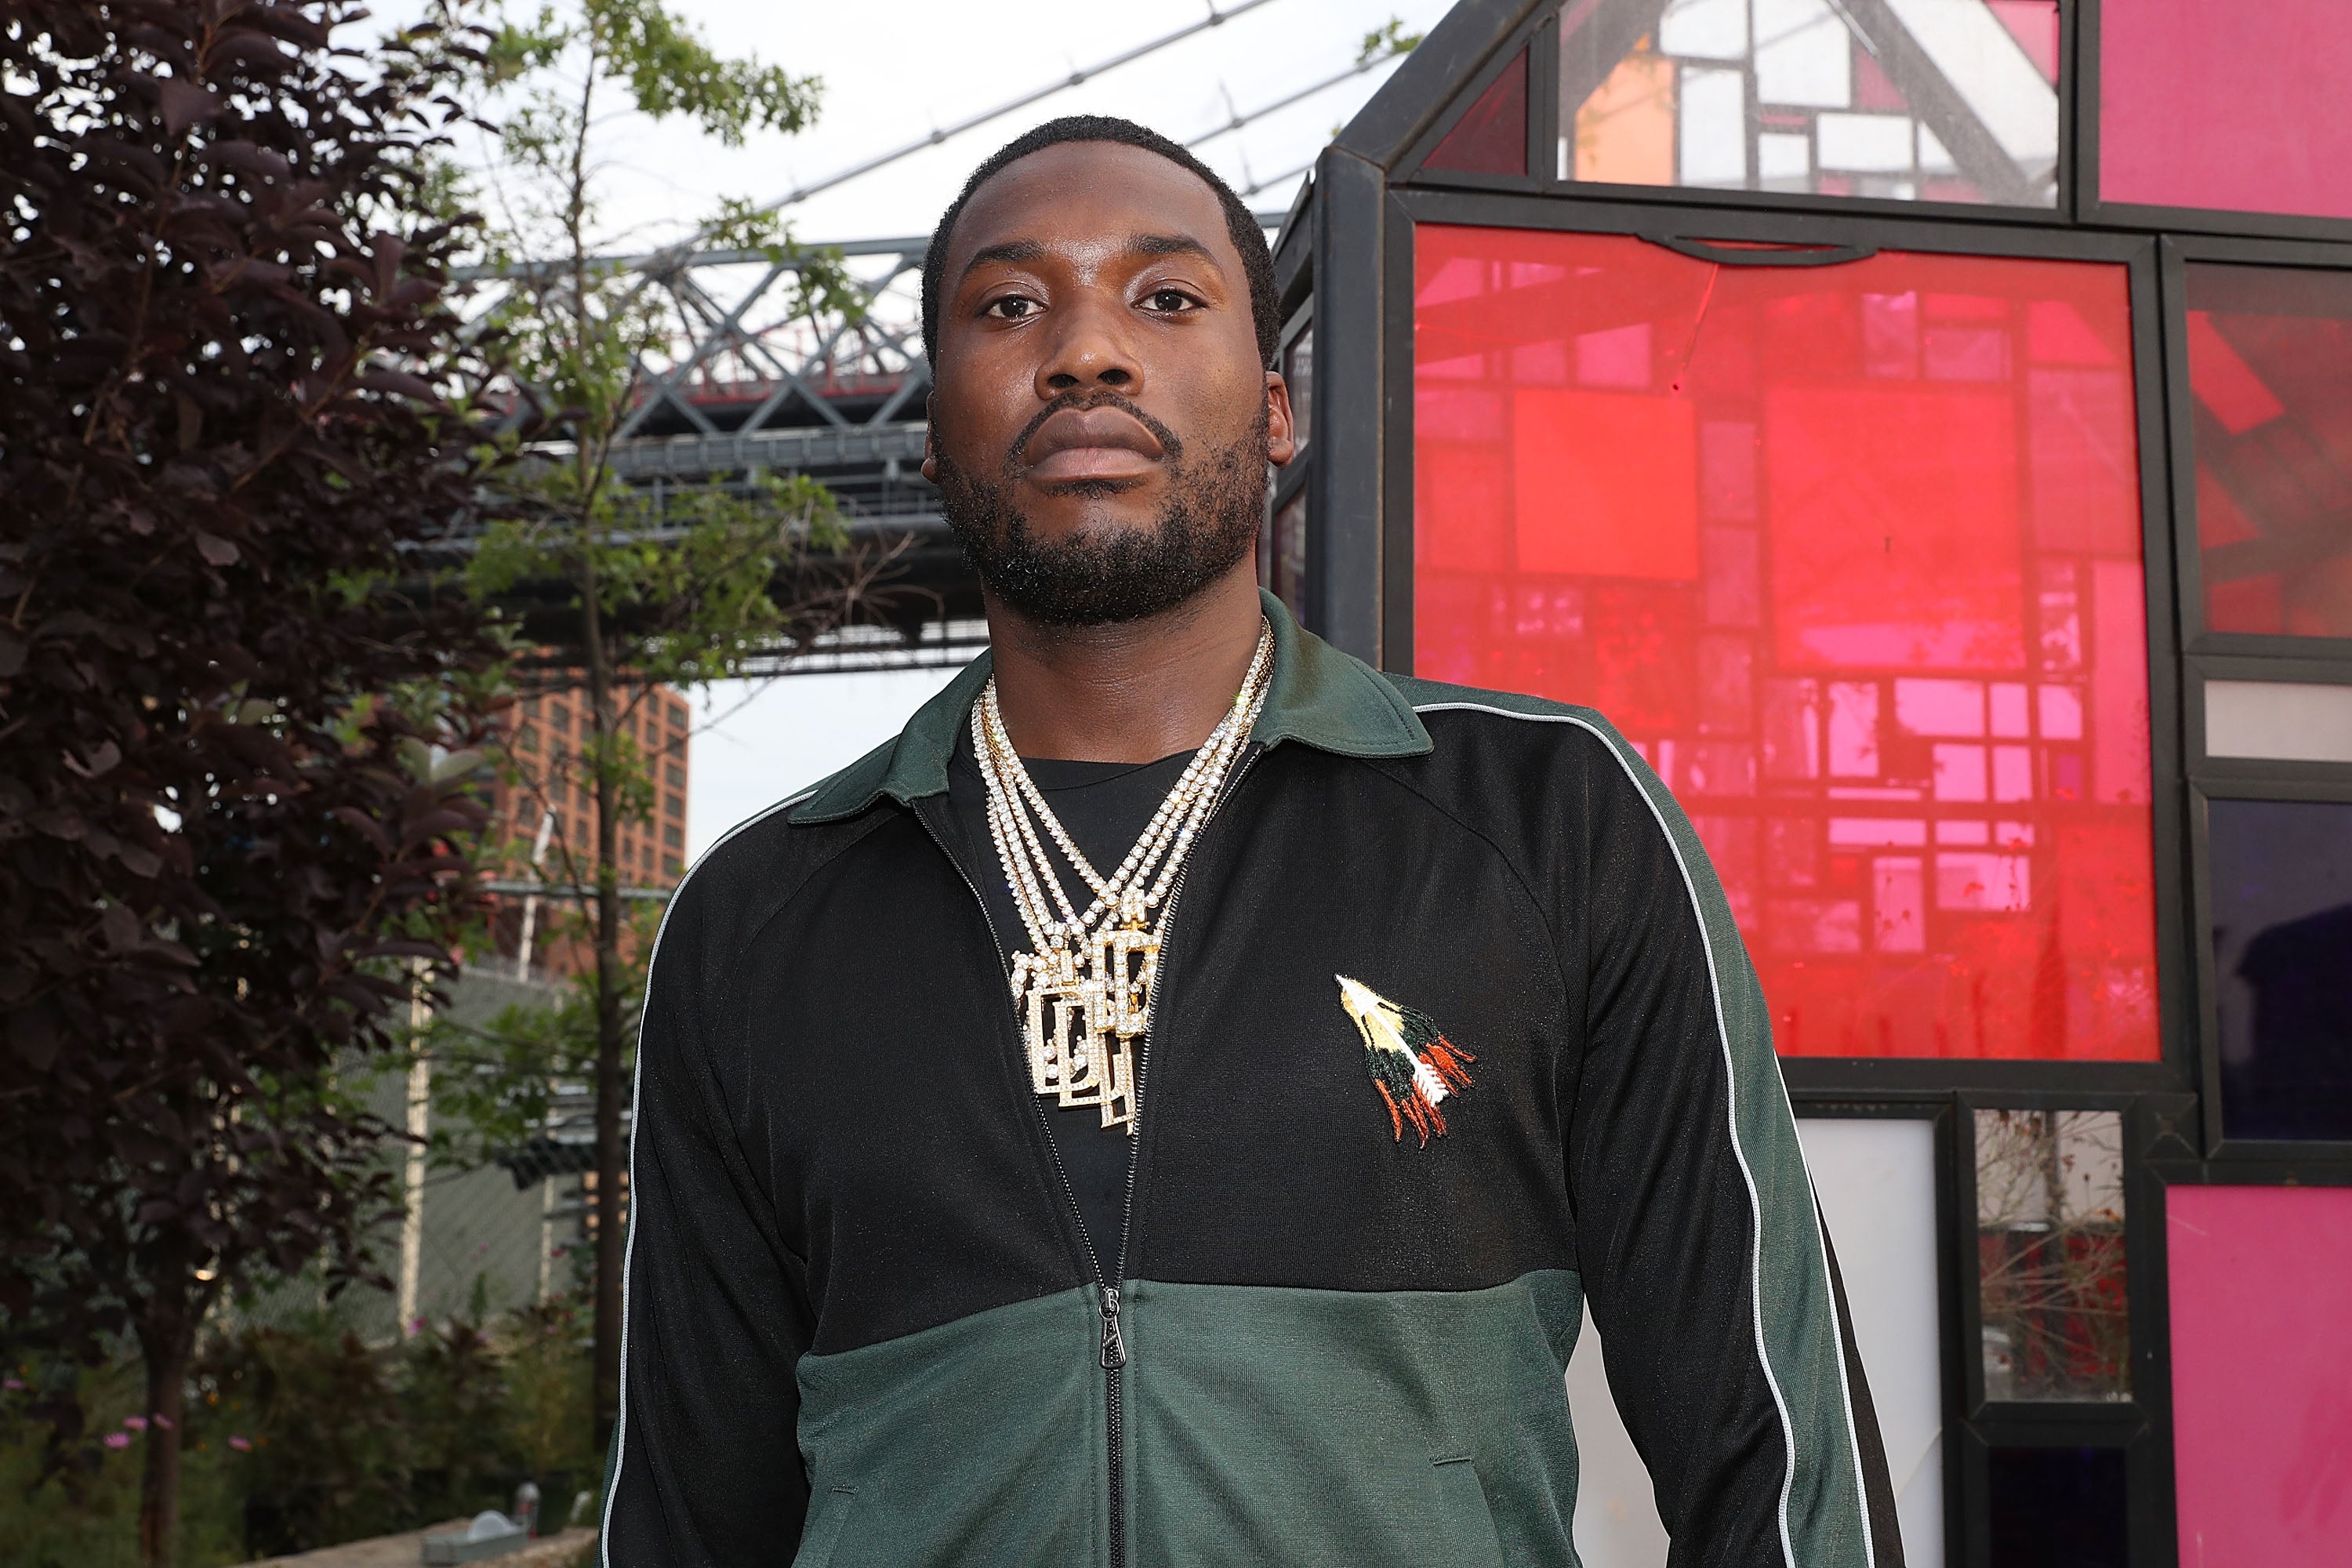 The Quick Read: Celebrities Show Support For Meek Mill After Rapper Receives Prison Sentence
